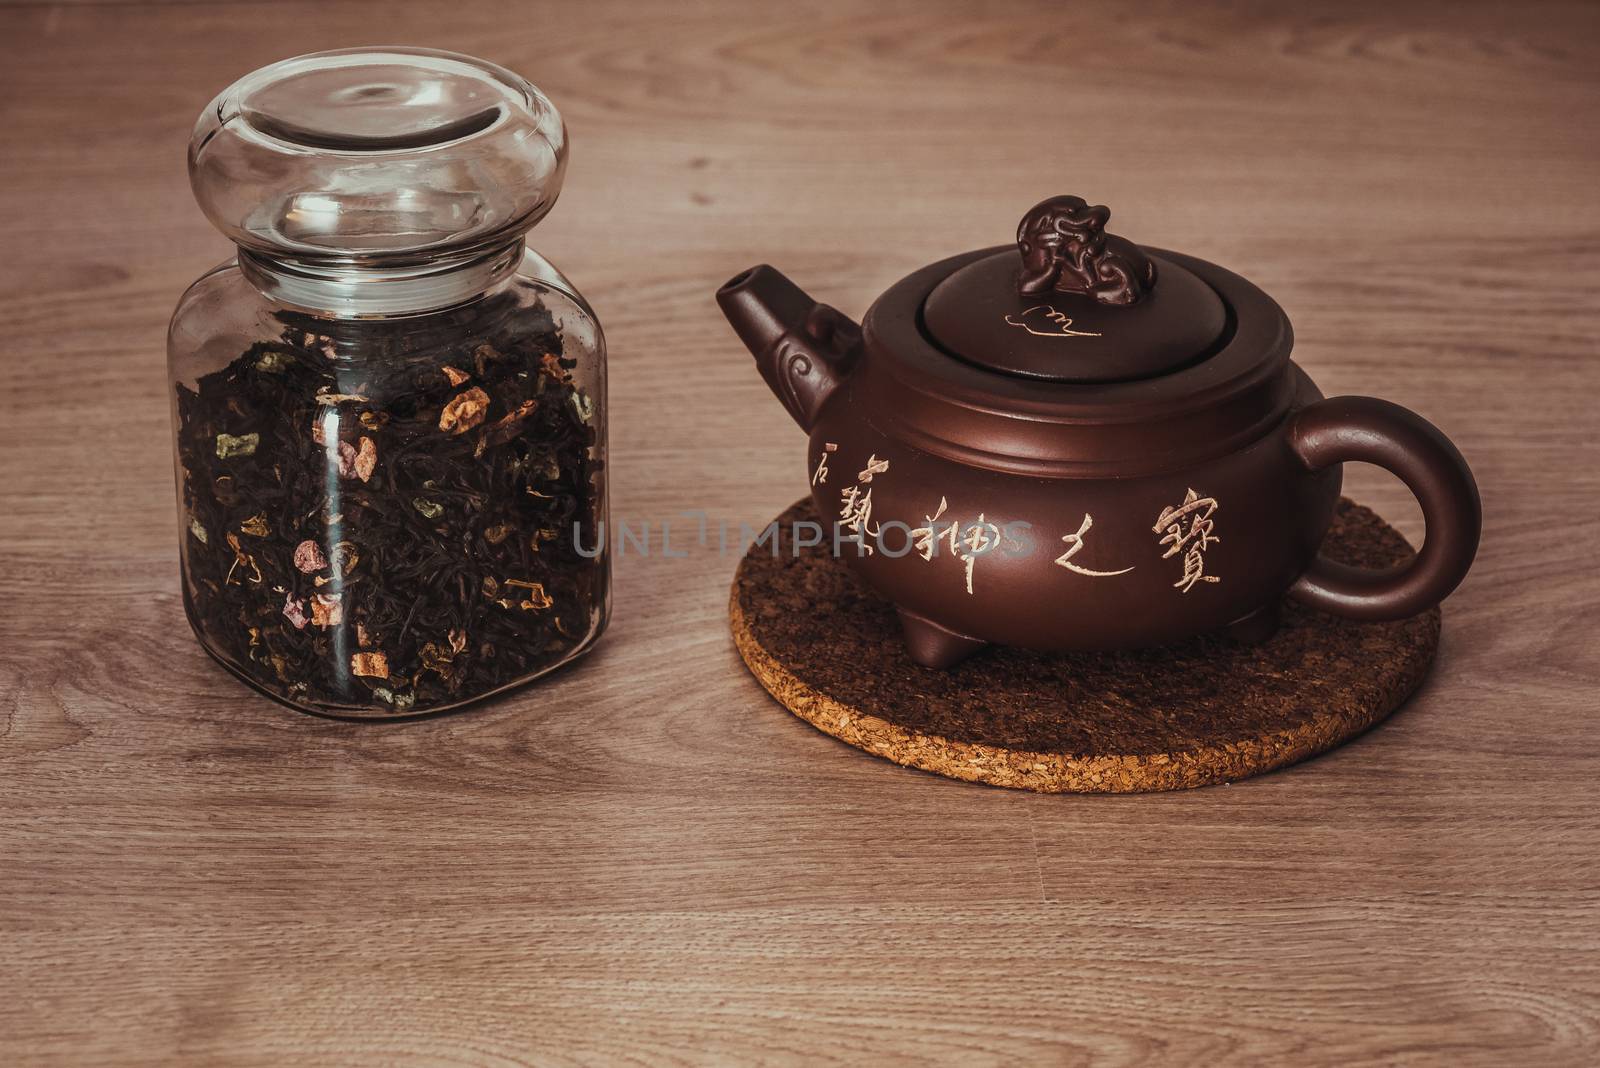 Asian teapot on stand and jar by Seva_blsv